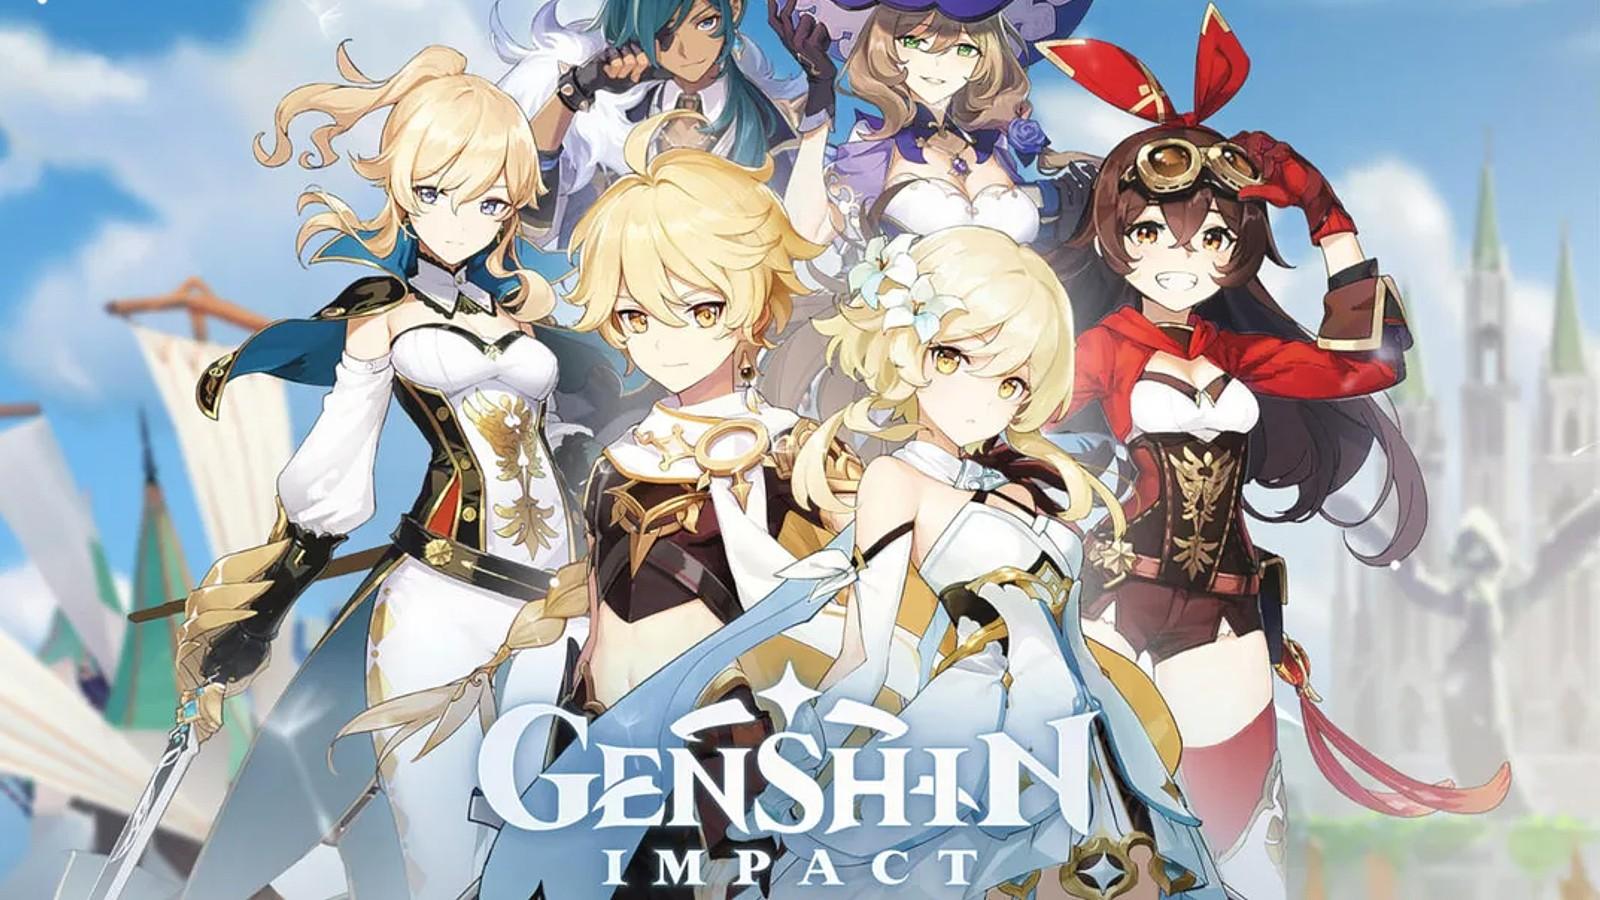 Genshin Impact cover image featuring many characters